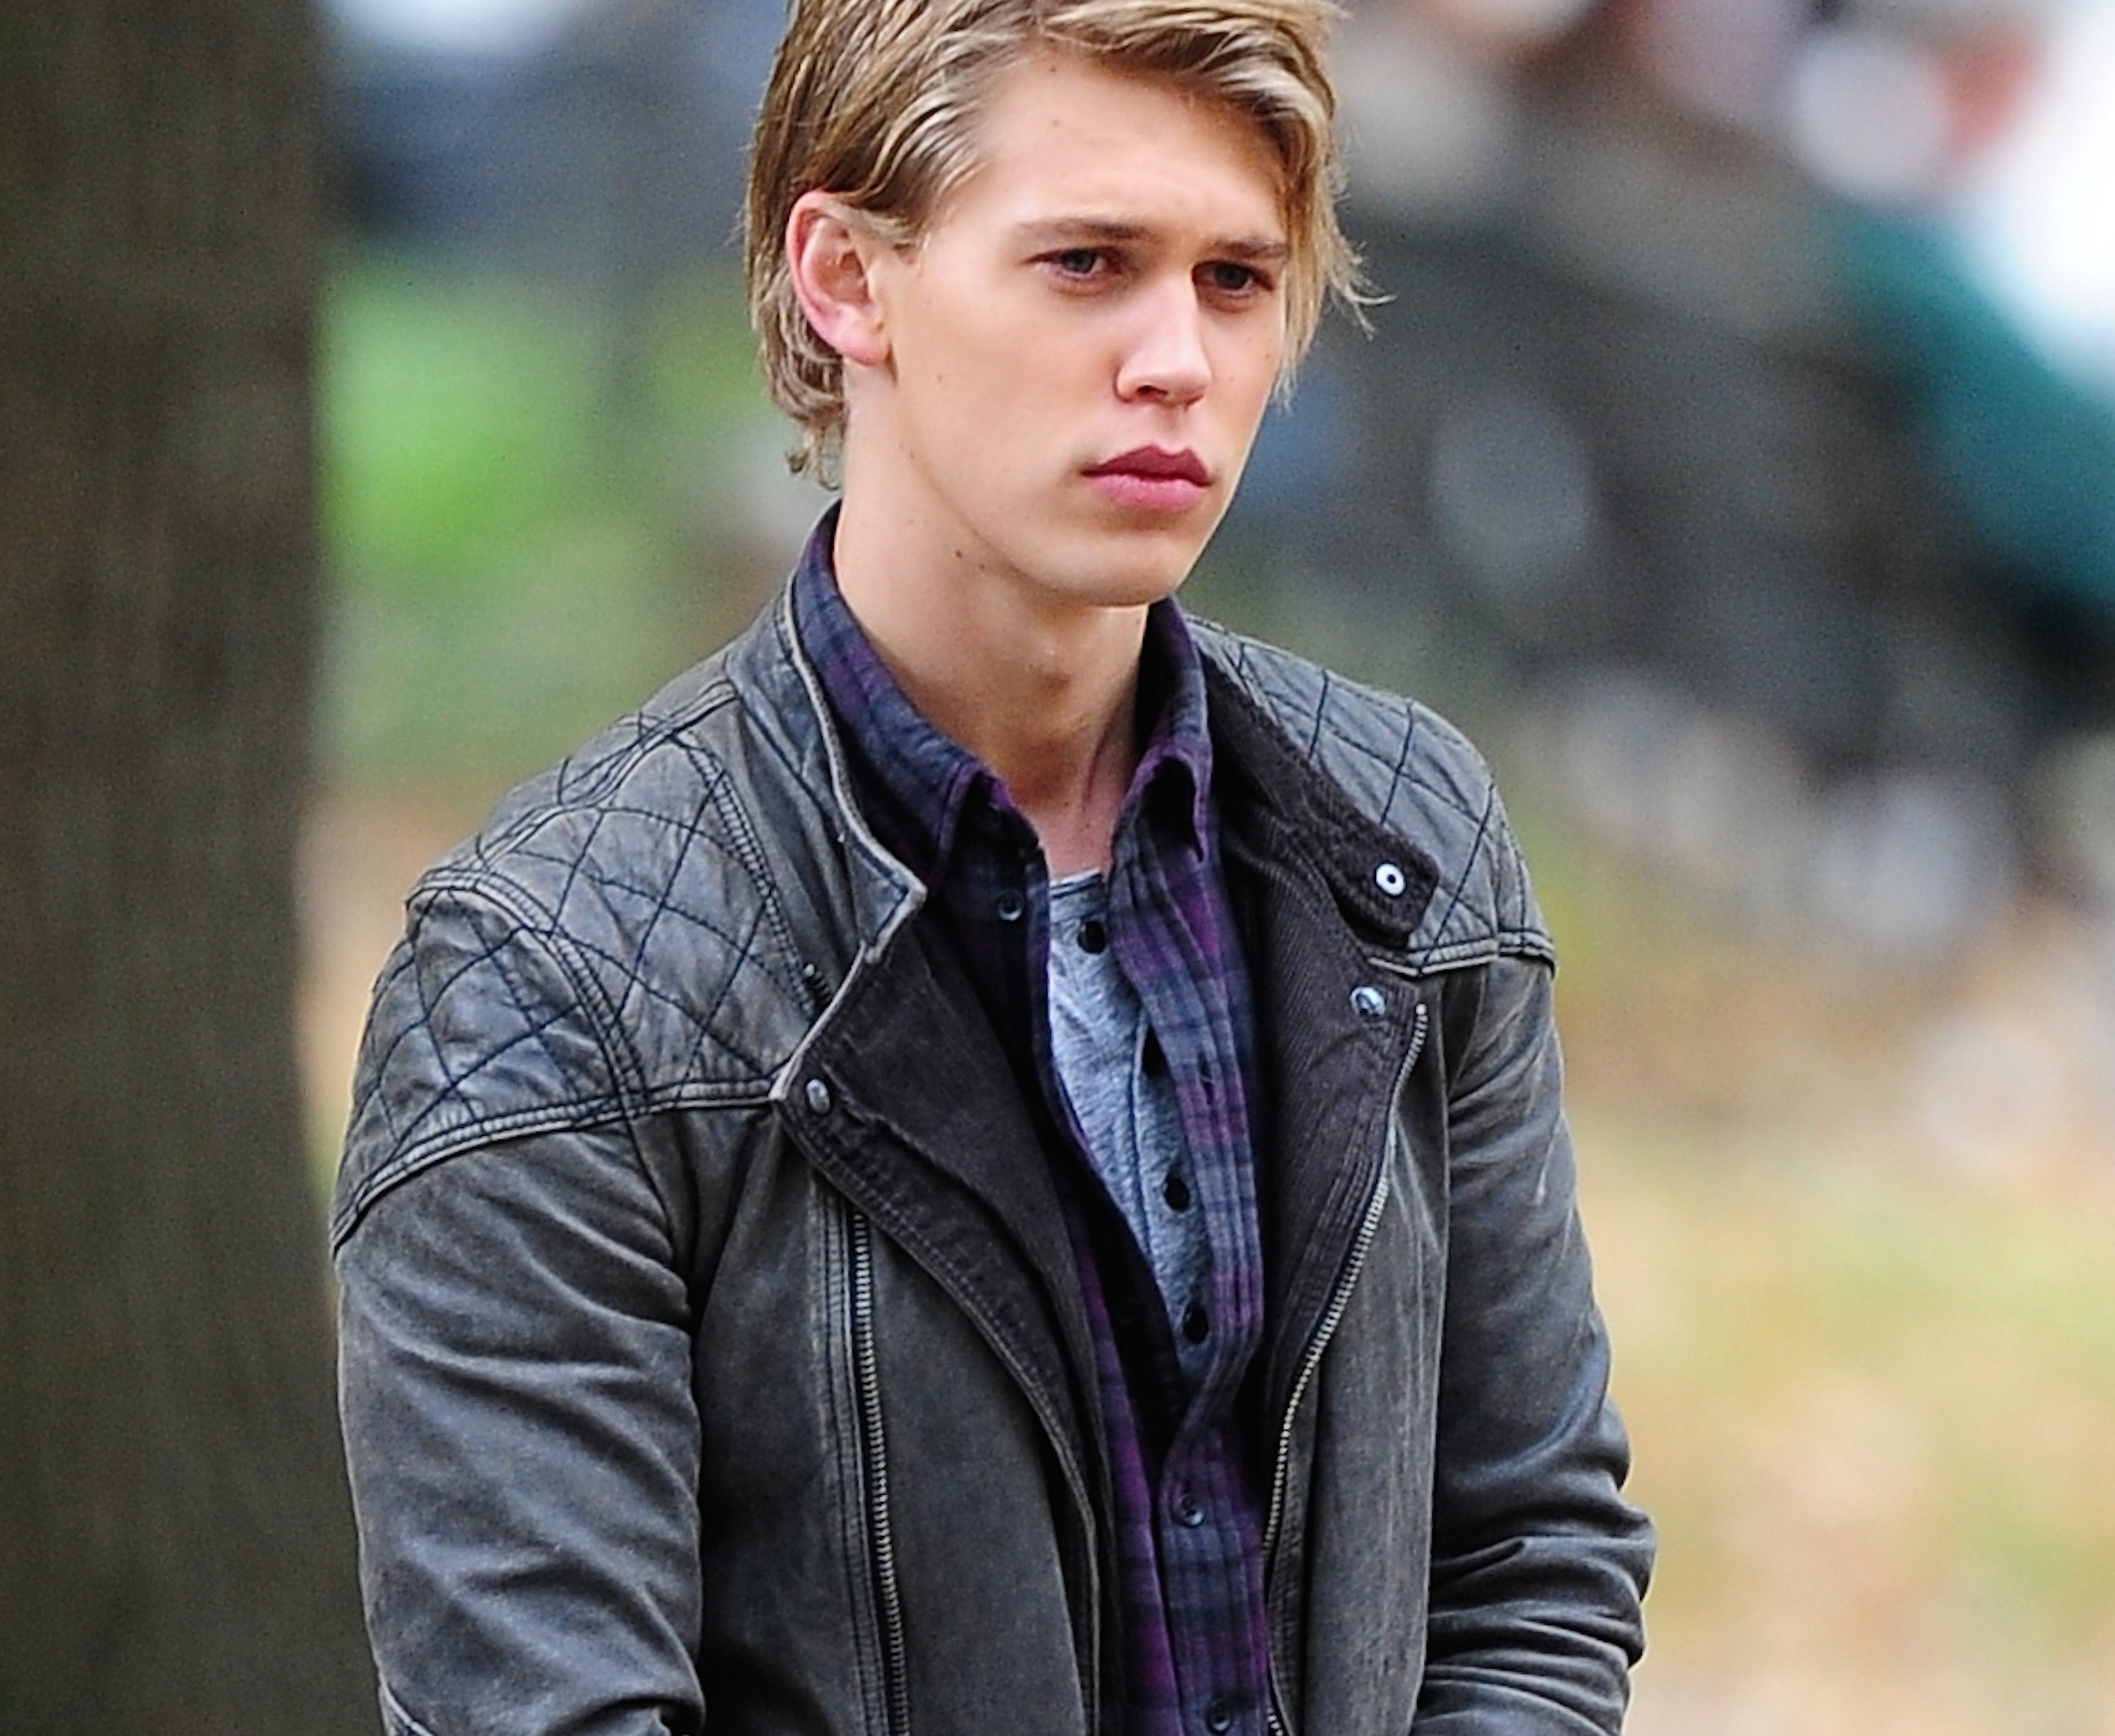 Pictures of Austin Butler.